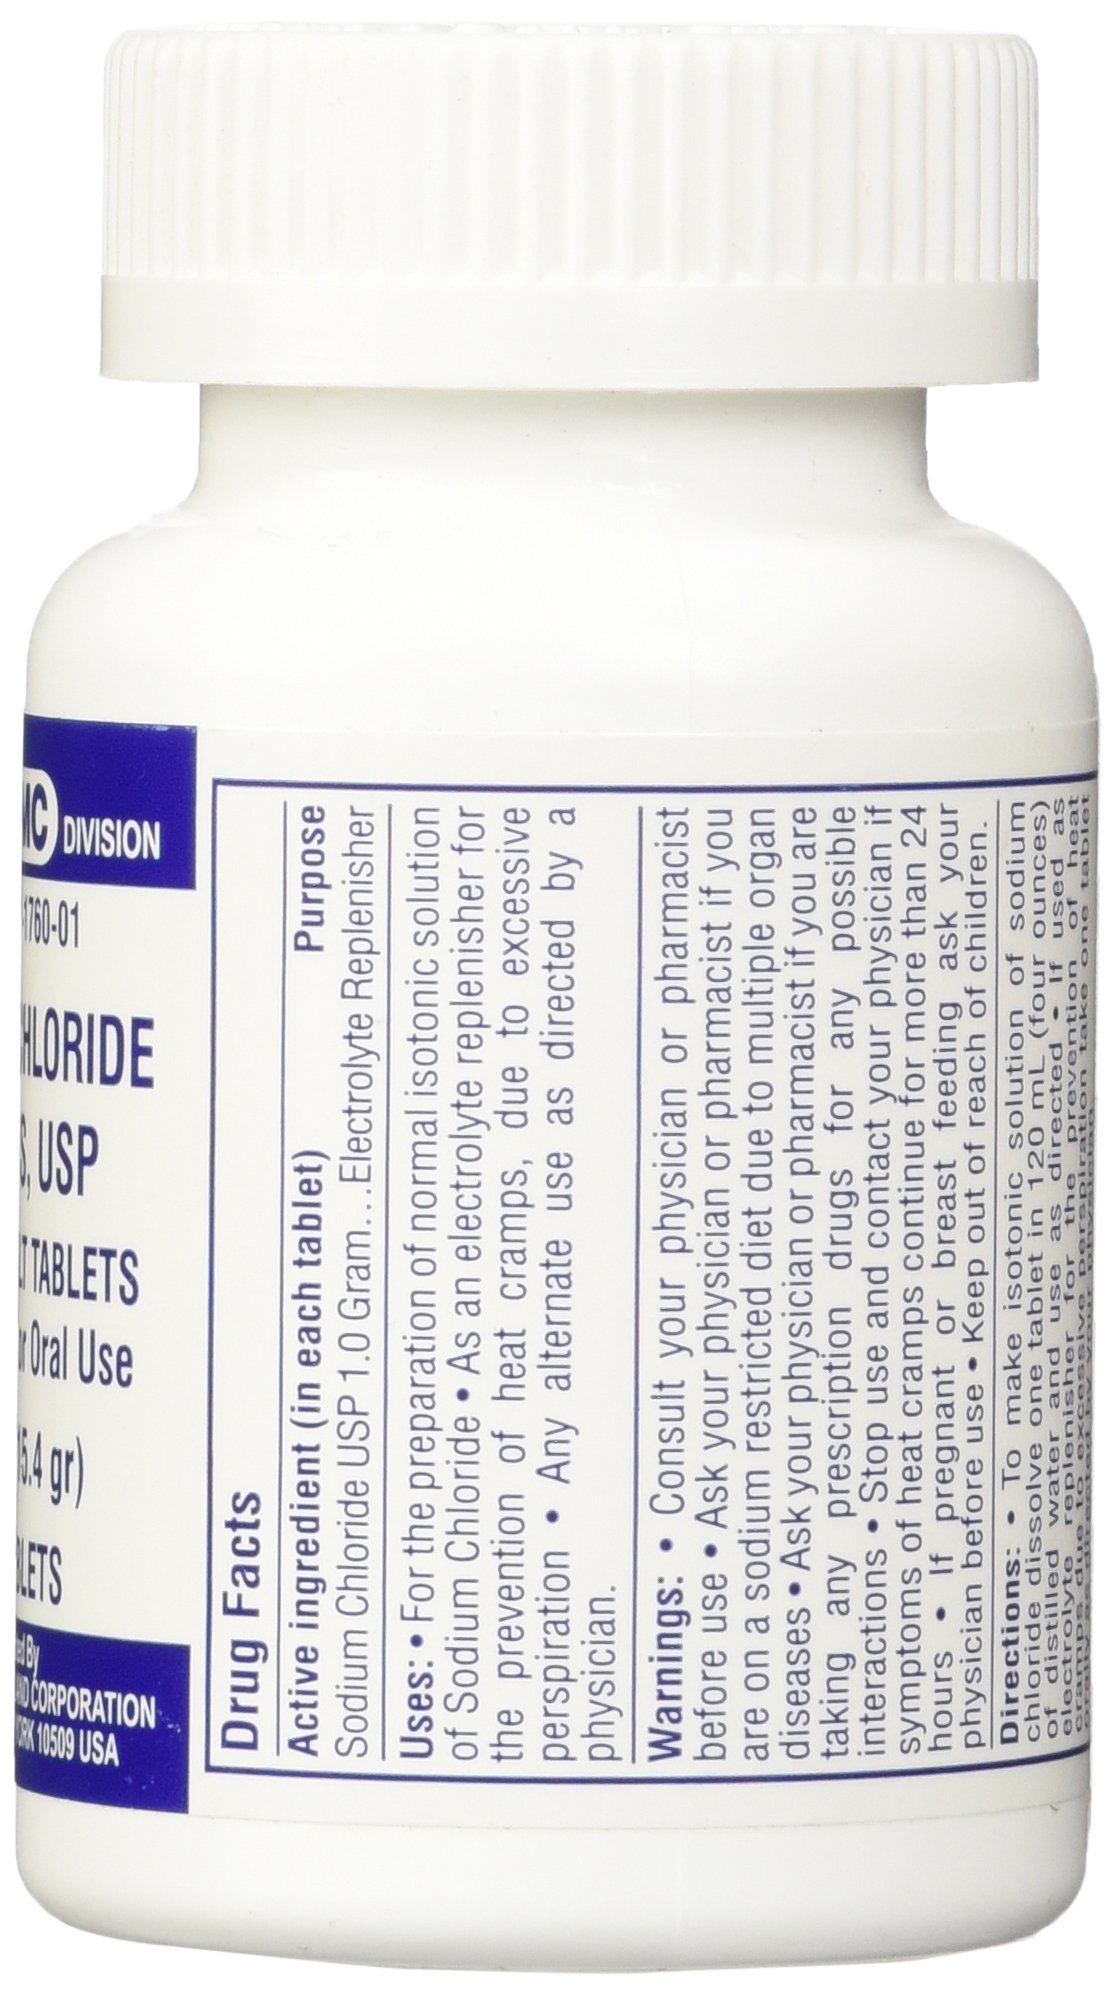 CONSOLIDATED MIDLAND CORP. Sodium Chloride Tablets 1 Gm, USP Normal Salt Tablets - 100 Tablets